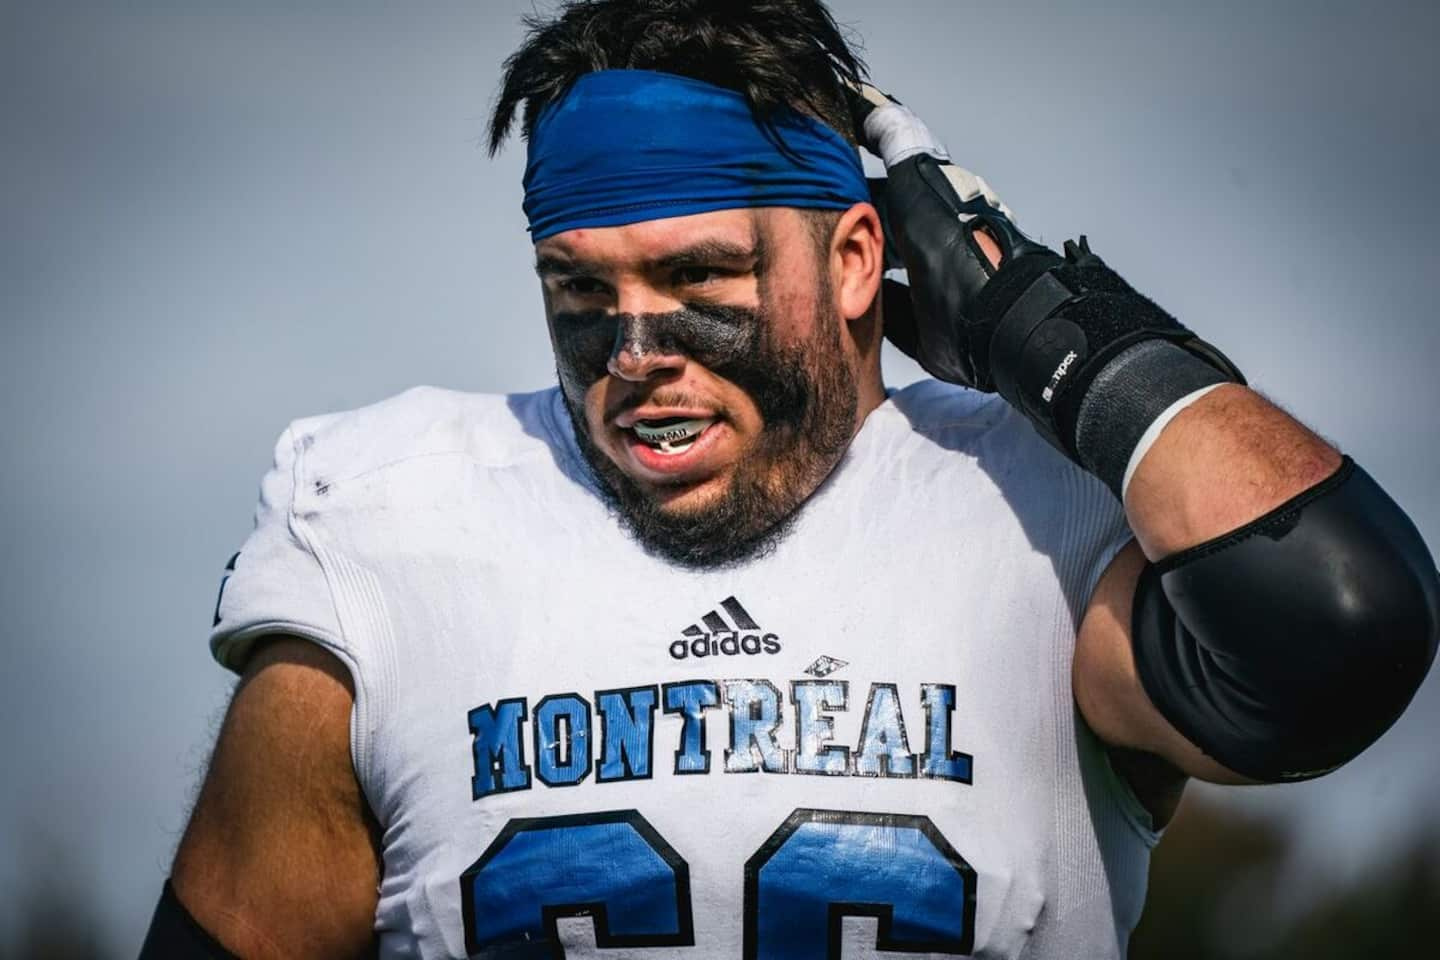 The Alouettes confirm the arrival of Pier-Olivier Lestage